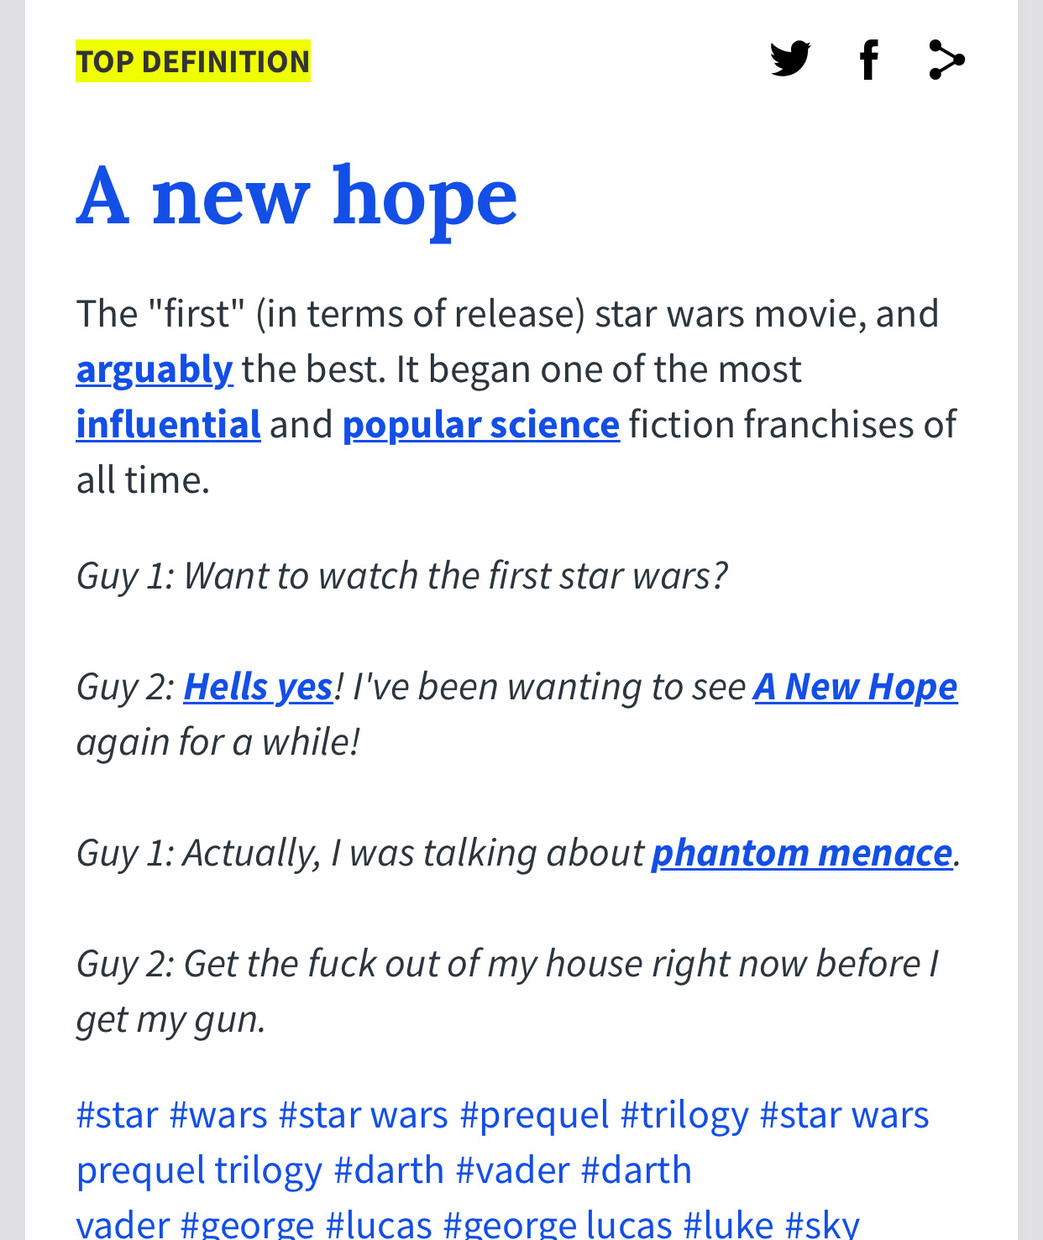 NOT MY MEME! This came from urbandictionary.com.